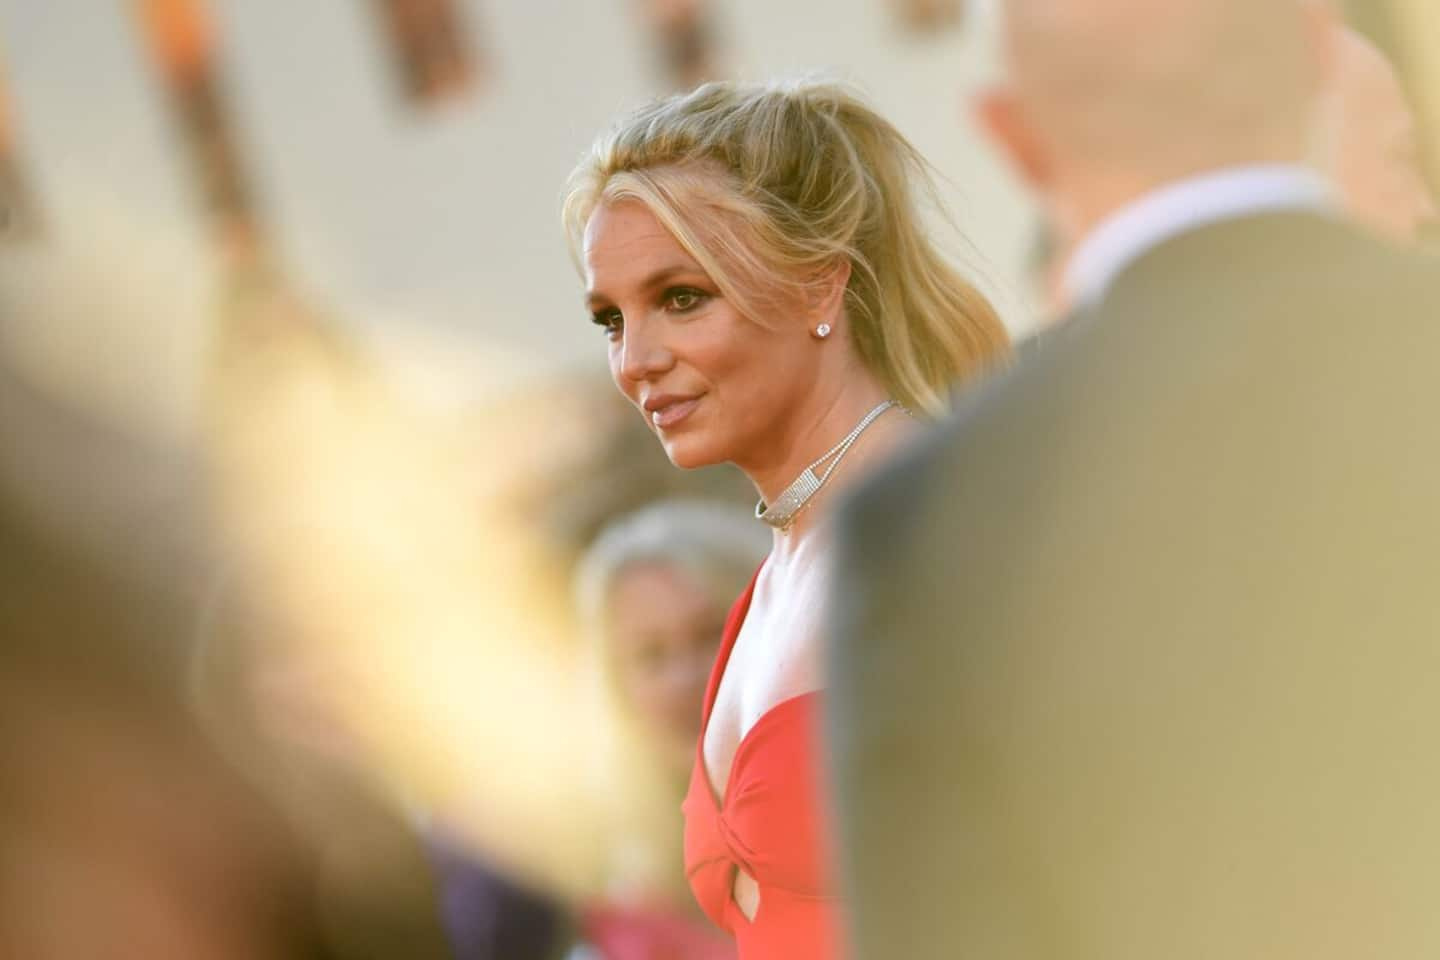 After interrupting Britney Spears' marriage, her ex-husband receives a restraining order